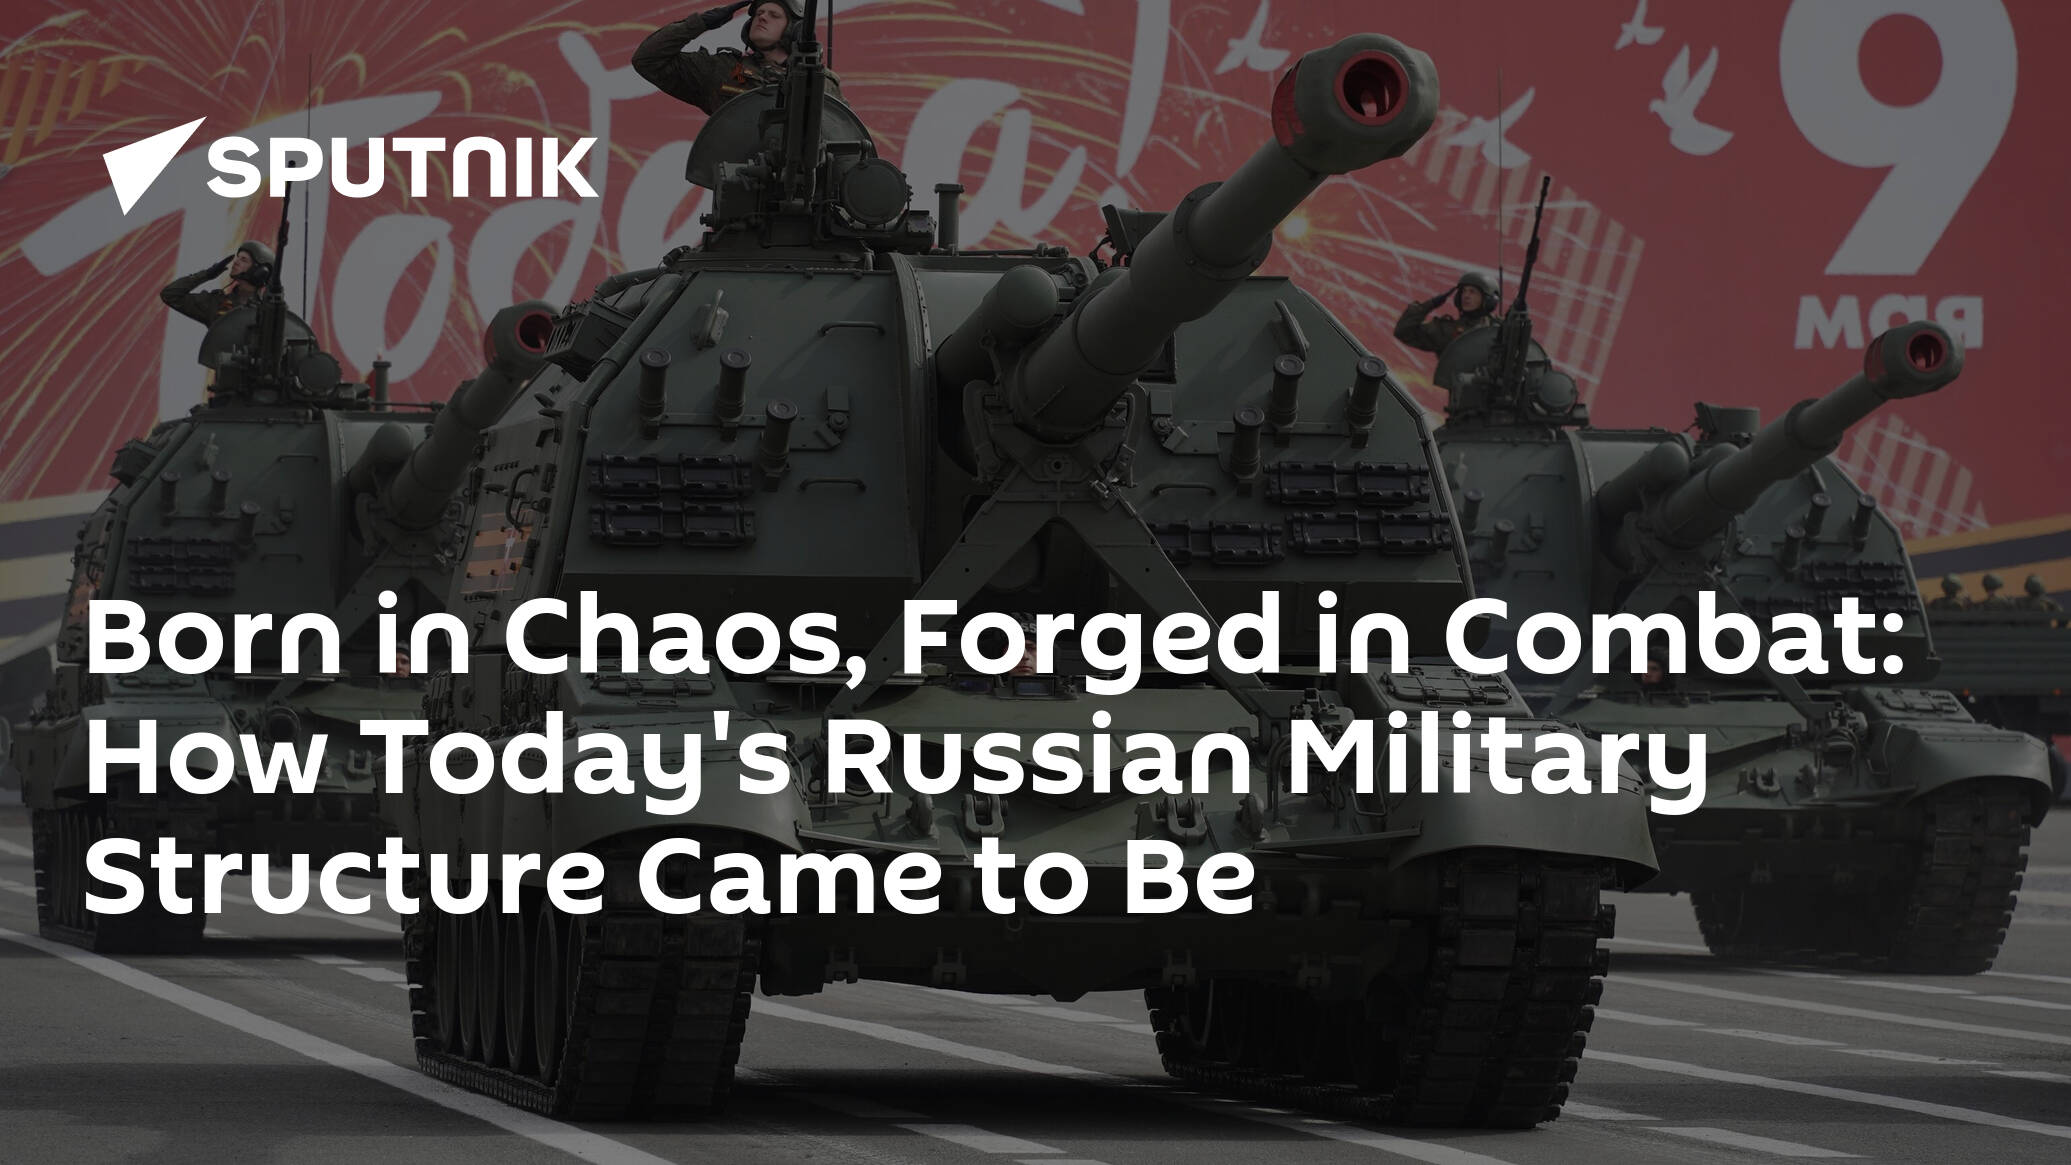 Born in Chaos, Forged in Combat: How Today's Russian Military Structure Came to Be